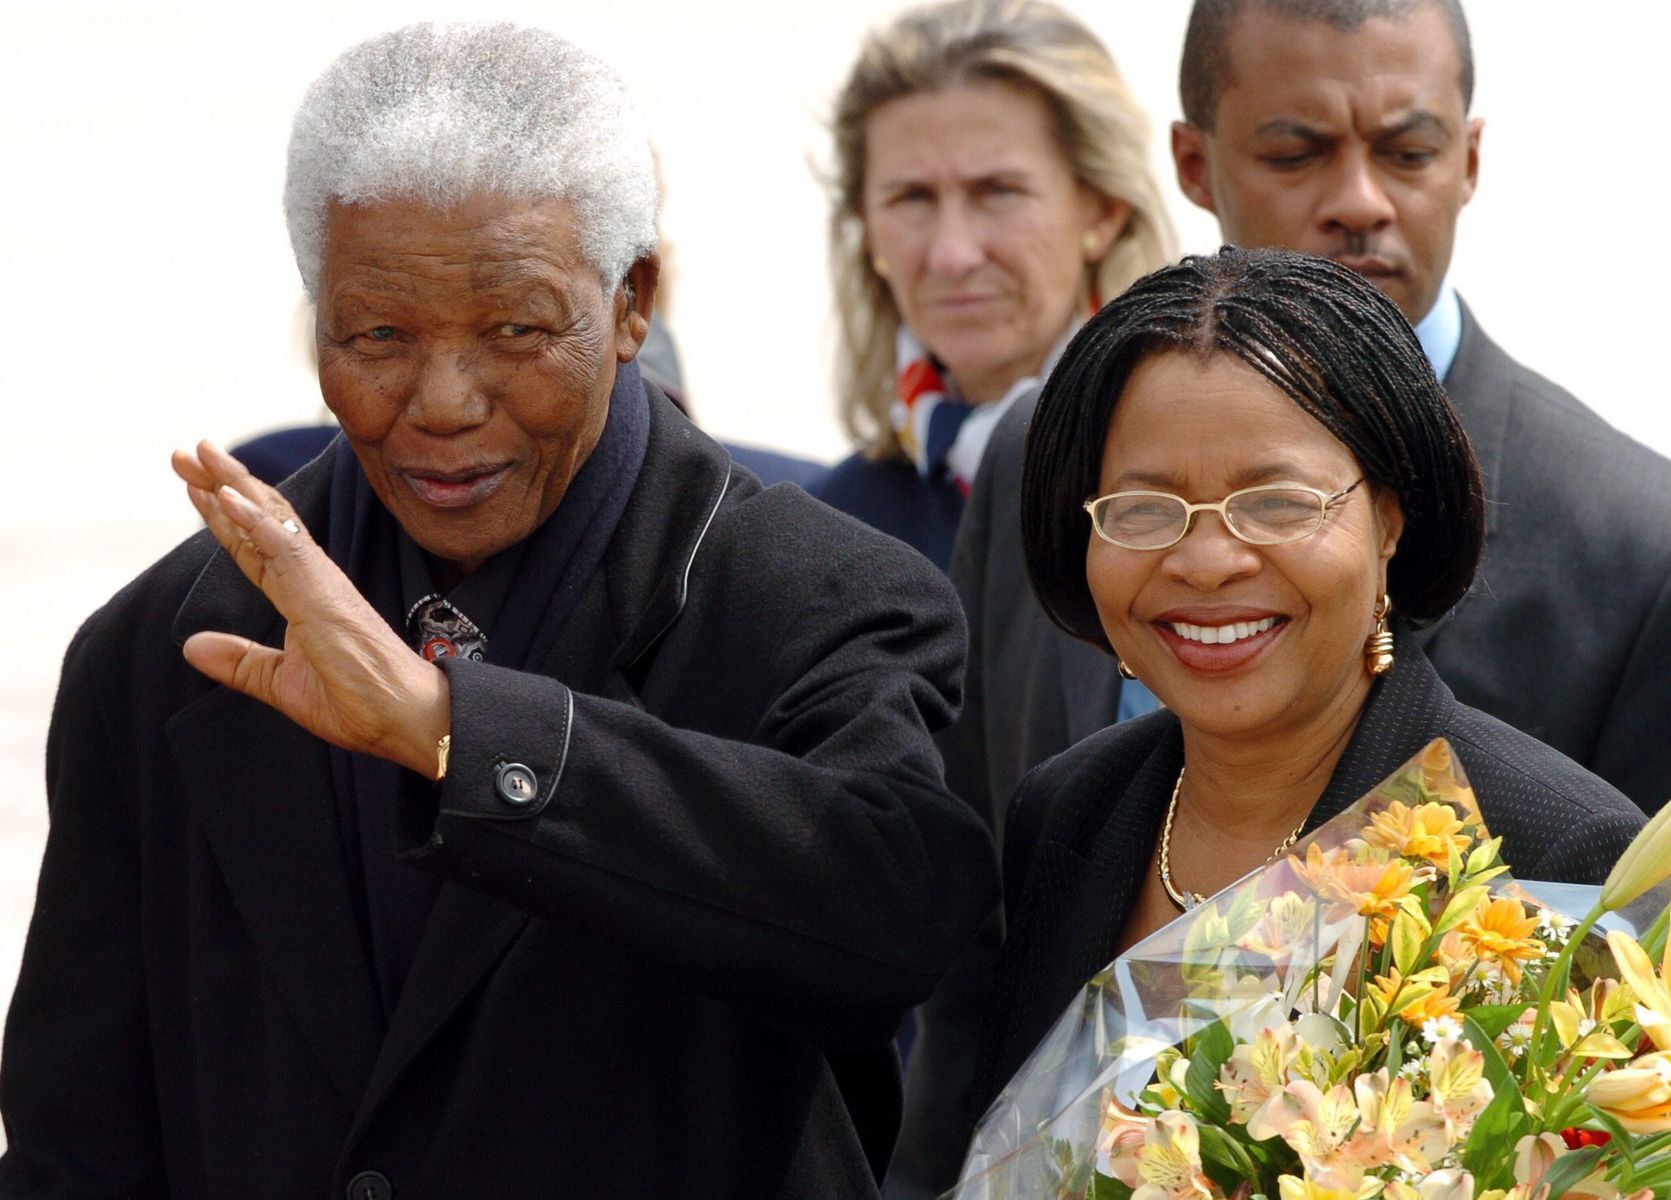 <p>As he neared 80, Mandela fell in love with Graça Machel, the widow of Mozambique’s president. <a href="https://www.sahistory.org.za/dated-event/nelson-mandela-marries-graca-machel-his-80th-birthday" rel="noreferrer noopener">They married in 1998</a>, shortly before the end of Mandela’s presidential term. Mandela and his third wife then divided their time <a href="https://www.cnn.com/2013/12/05/world/africa/nelson-mandela-retirement-years/index.html" rel="noreferrer noopener">between Johannesburg and Maputo</a> in Mozambique. Graça would stay with <a href="https://www.theguardian.com/world/2013/dec/08/nelson-mandela-shared-final-moments-graca-machel-winnie-madikizela" rel="noreferrer noopener">him until the end</a> and be at his bedside when he died.</p>